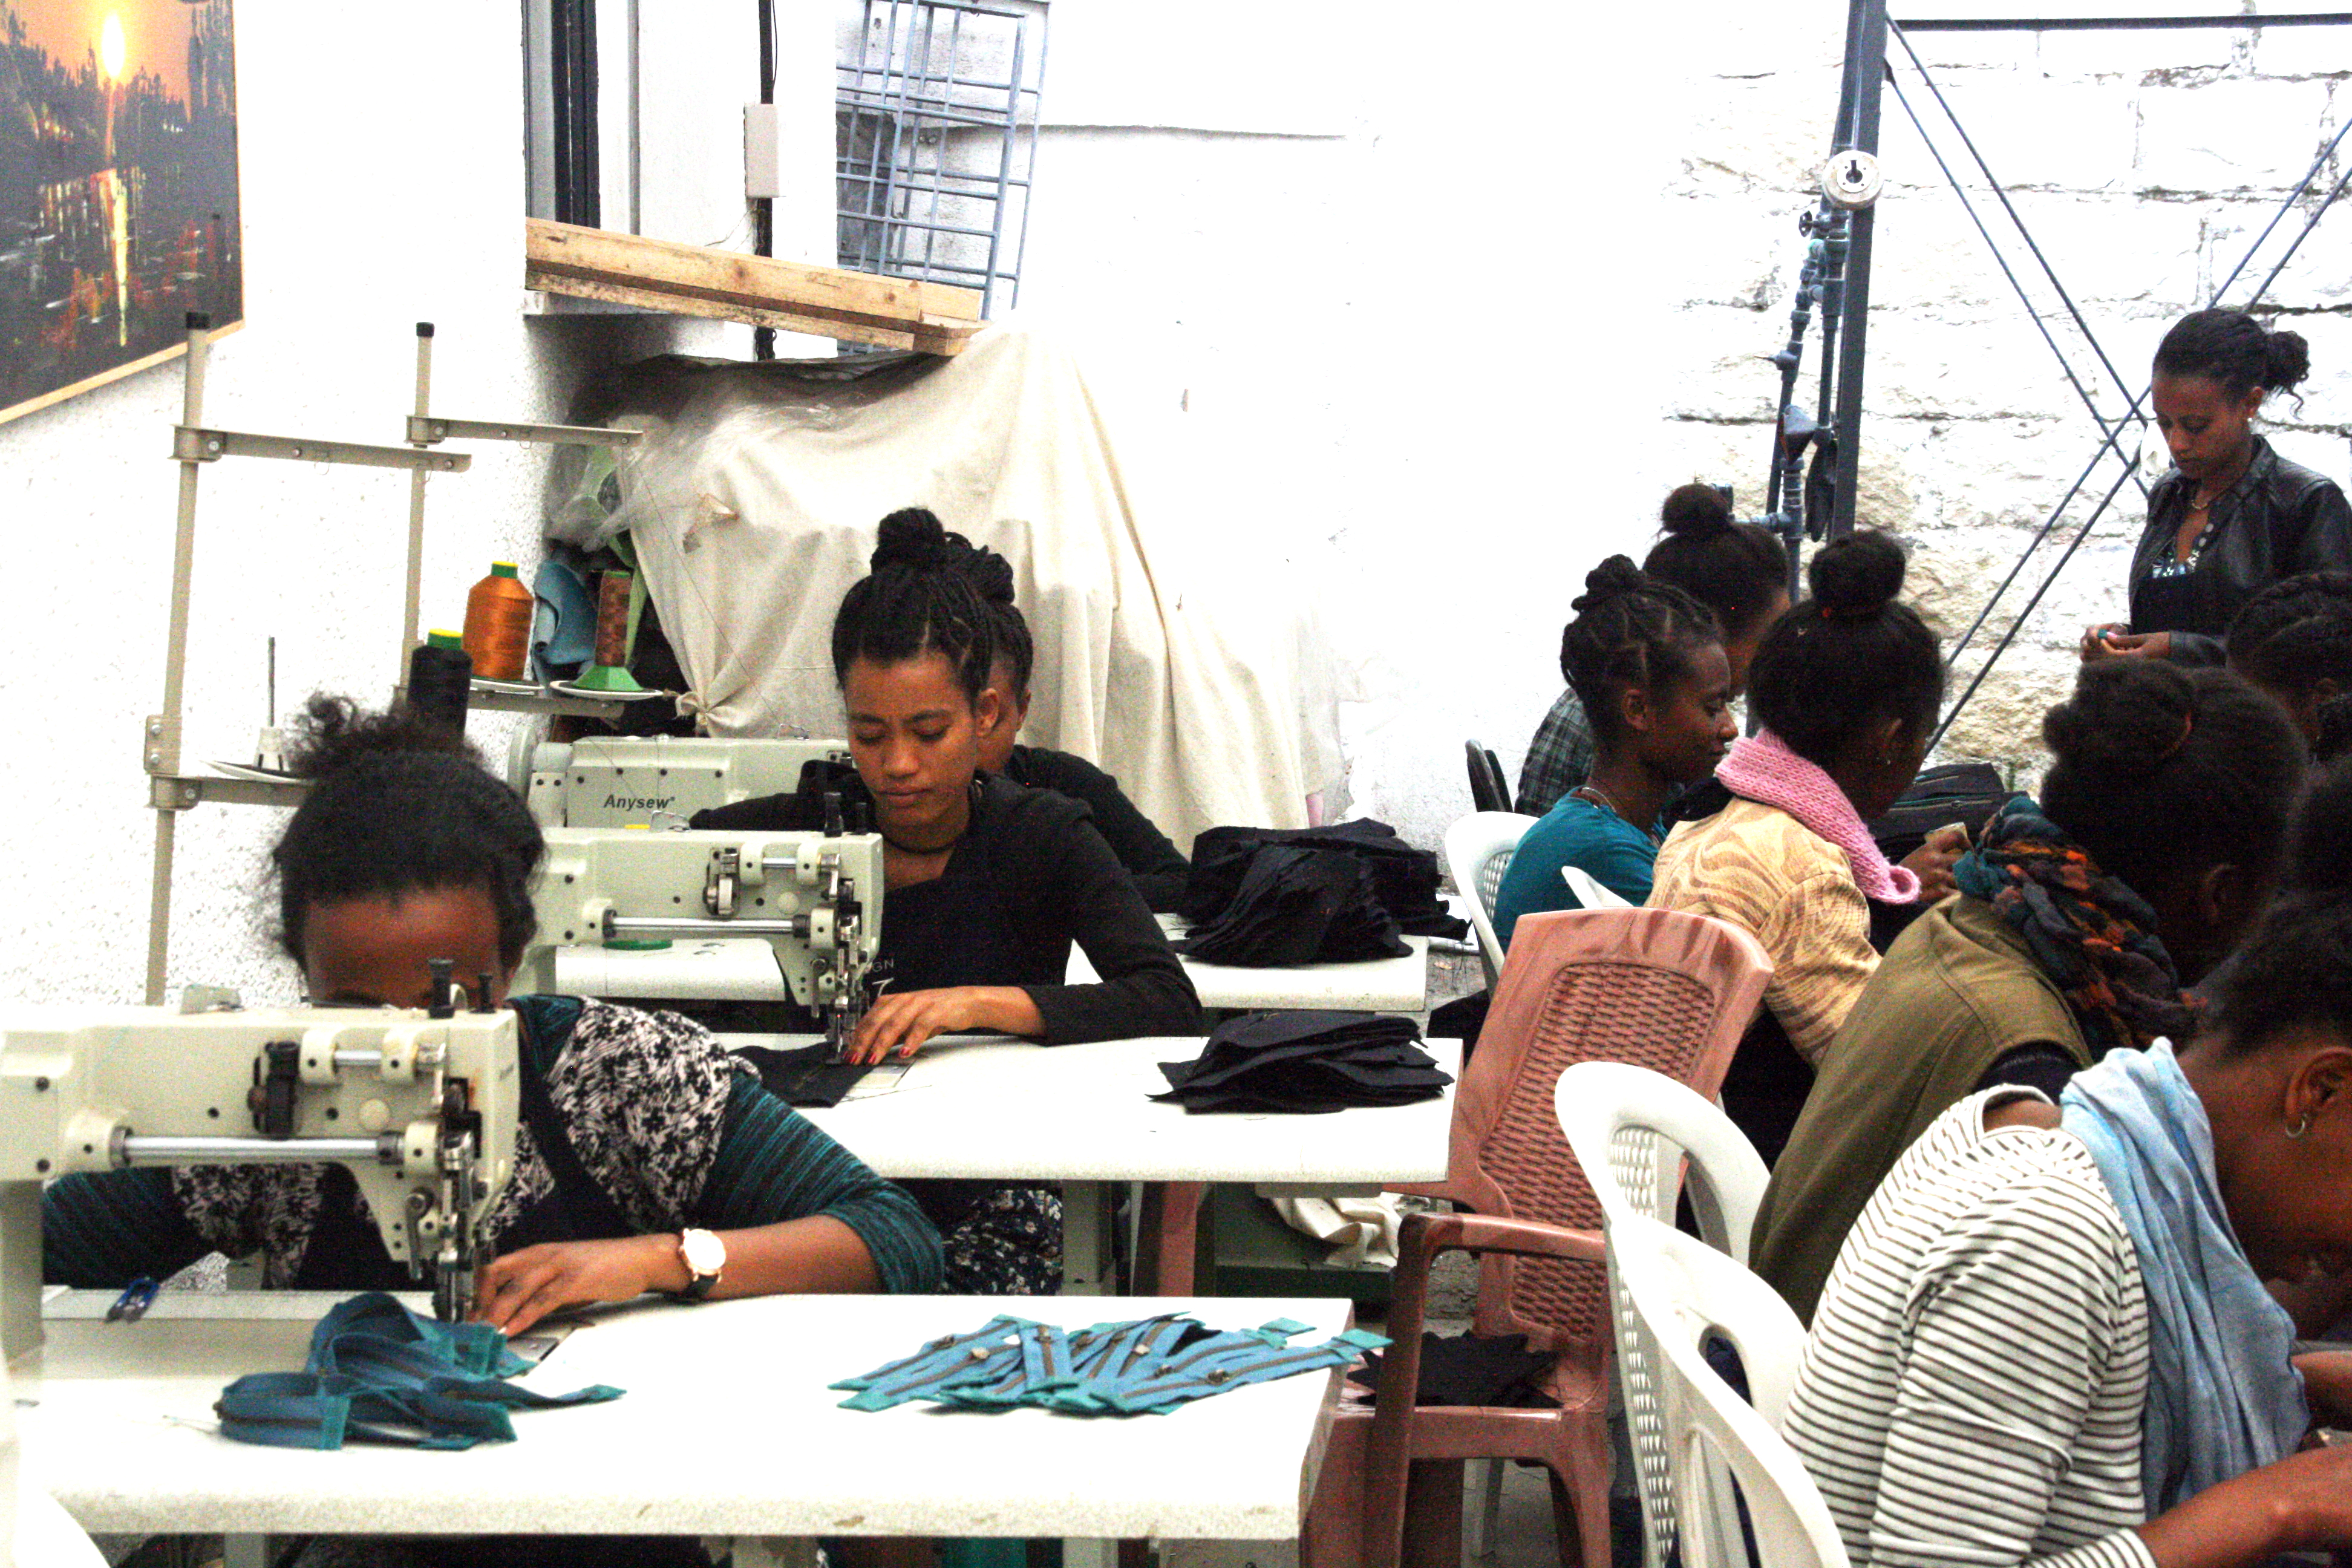 Leather workers at Sabegn in Addis Ababa Ethiopia ahead of the Social Enterprise World Forum 2019